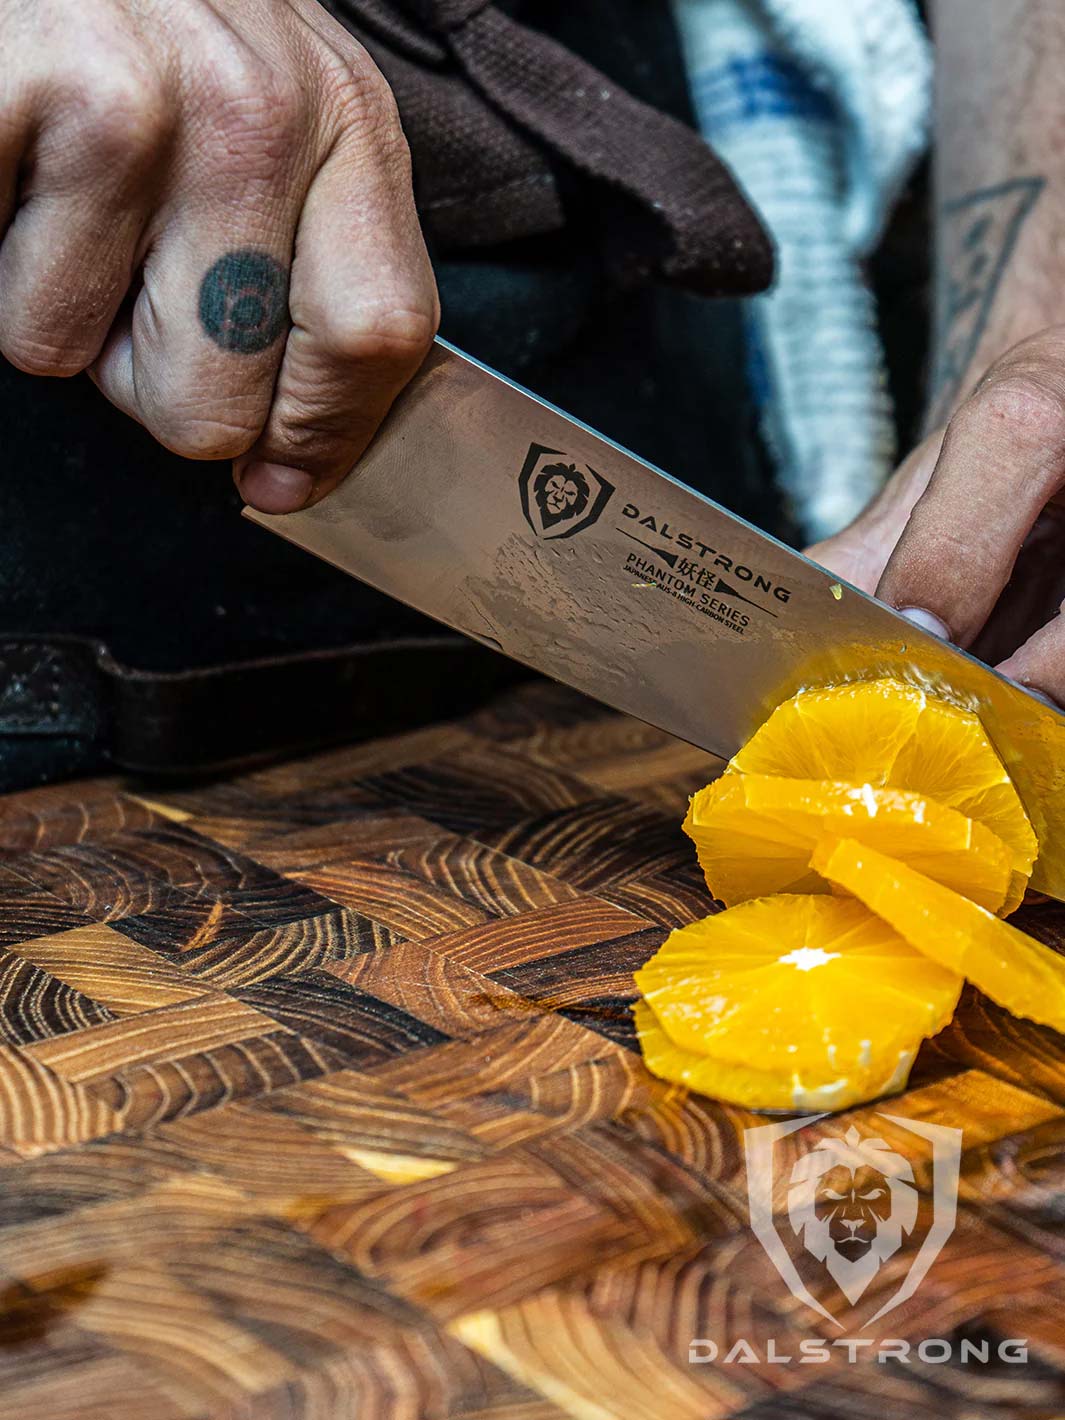 Dalstrong phantom series 8 inch chef knife with olive wood handle and slices of oranges on a cutting board.